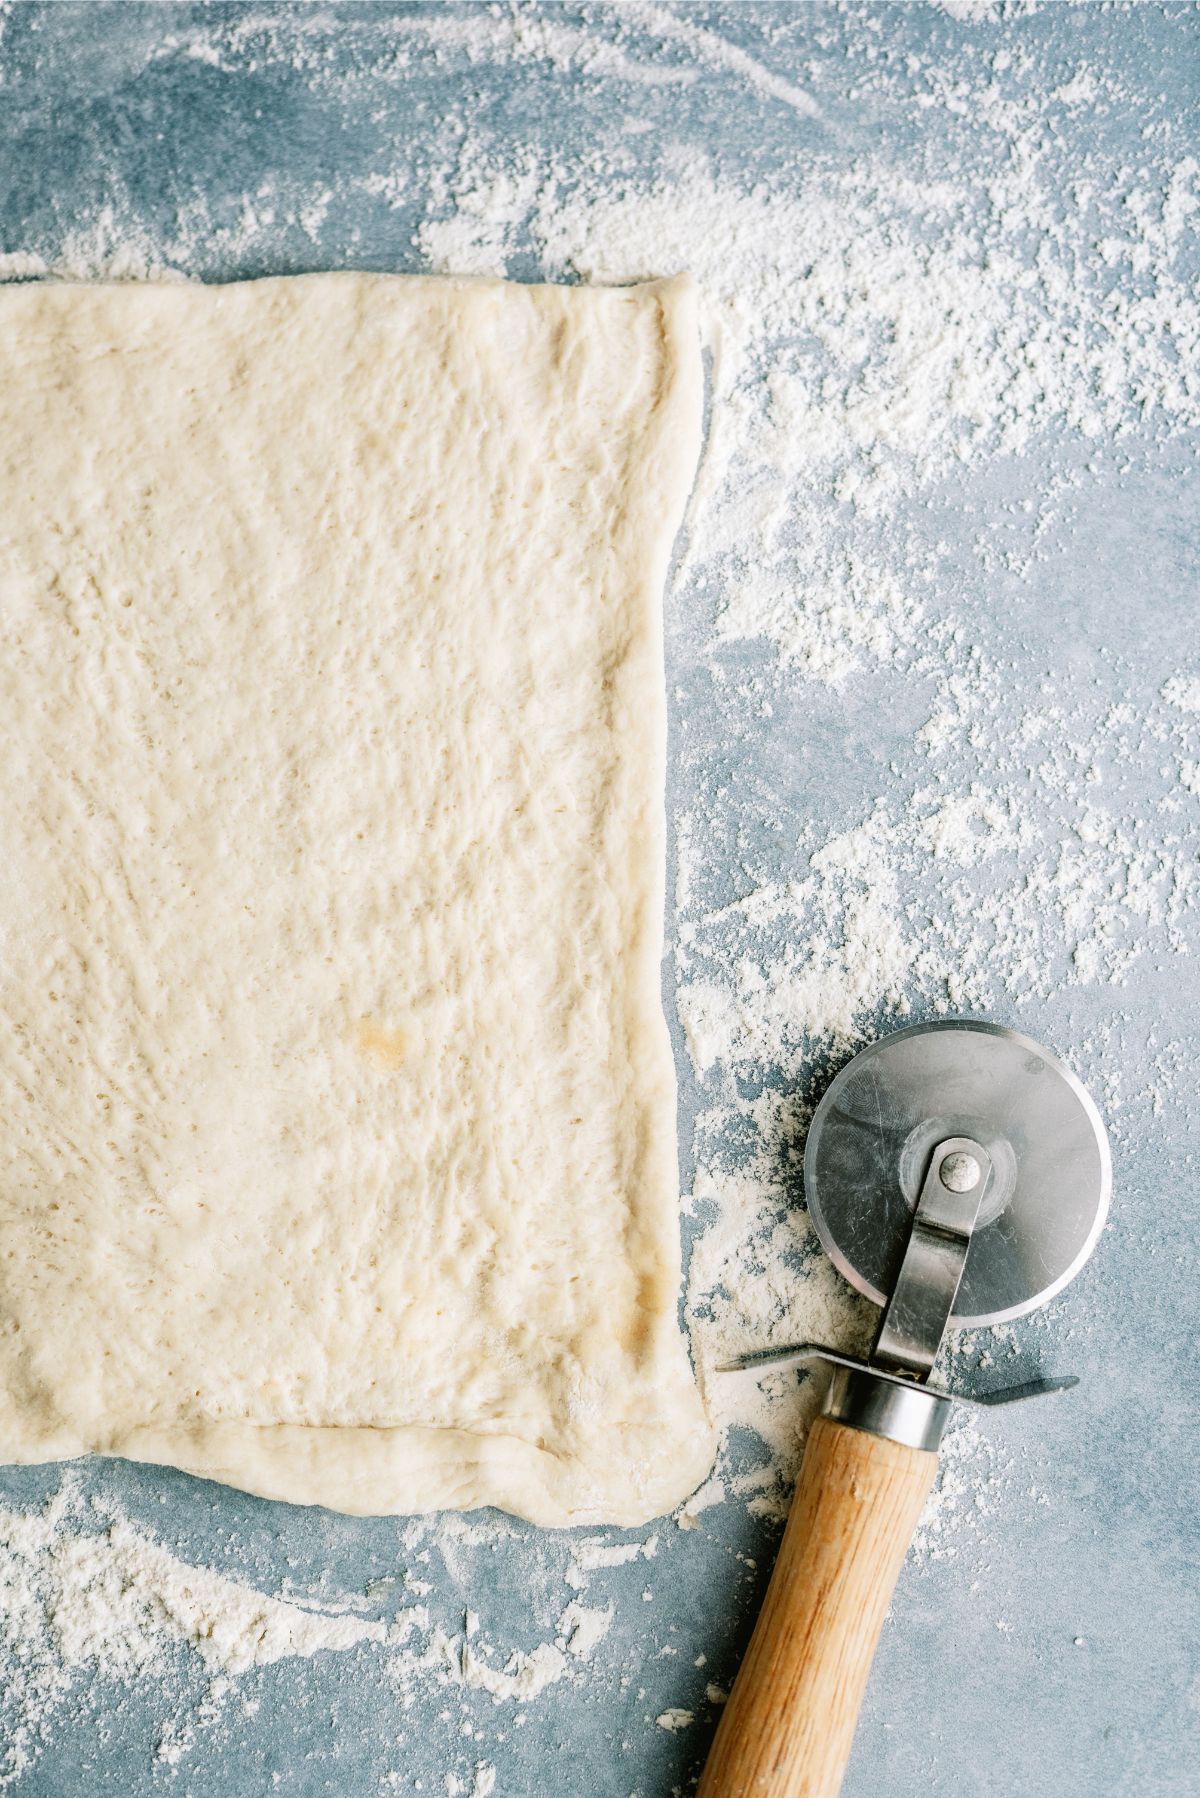 Unrolled pizza dough on a lightly floured surface next to a pizza cutter